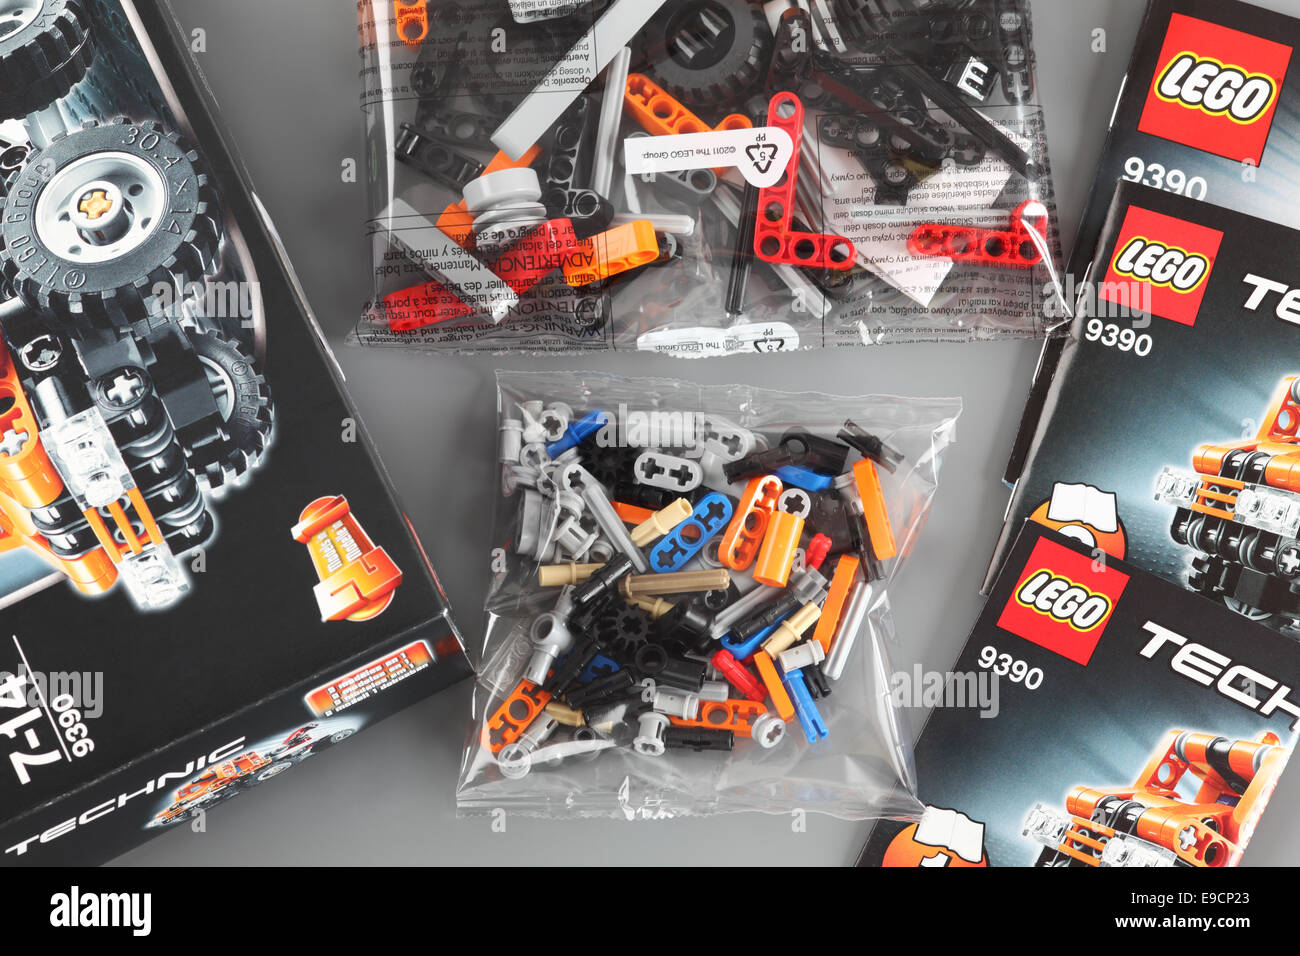 Tambov, Russian Federation - April 06, 2013 LEGO Technic set with box,  instructions and details in plastic packs Stock Photo - Alamy